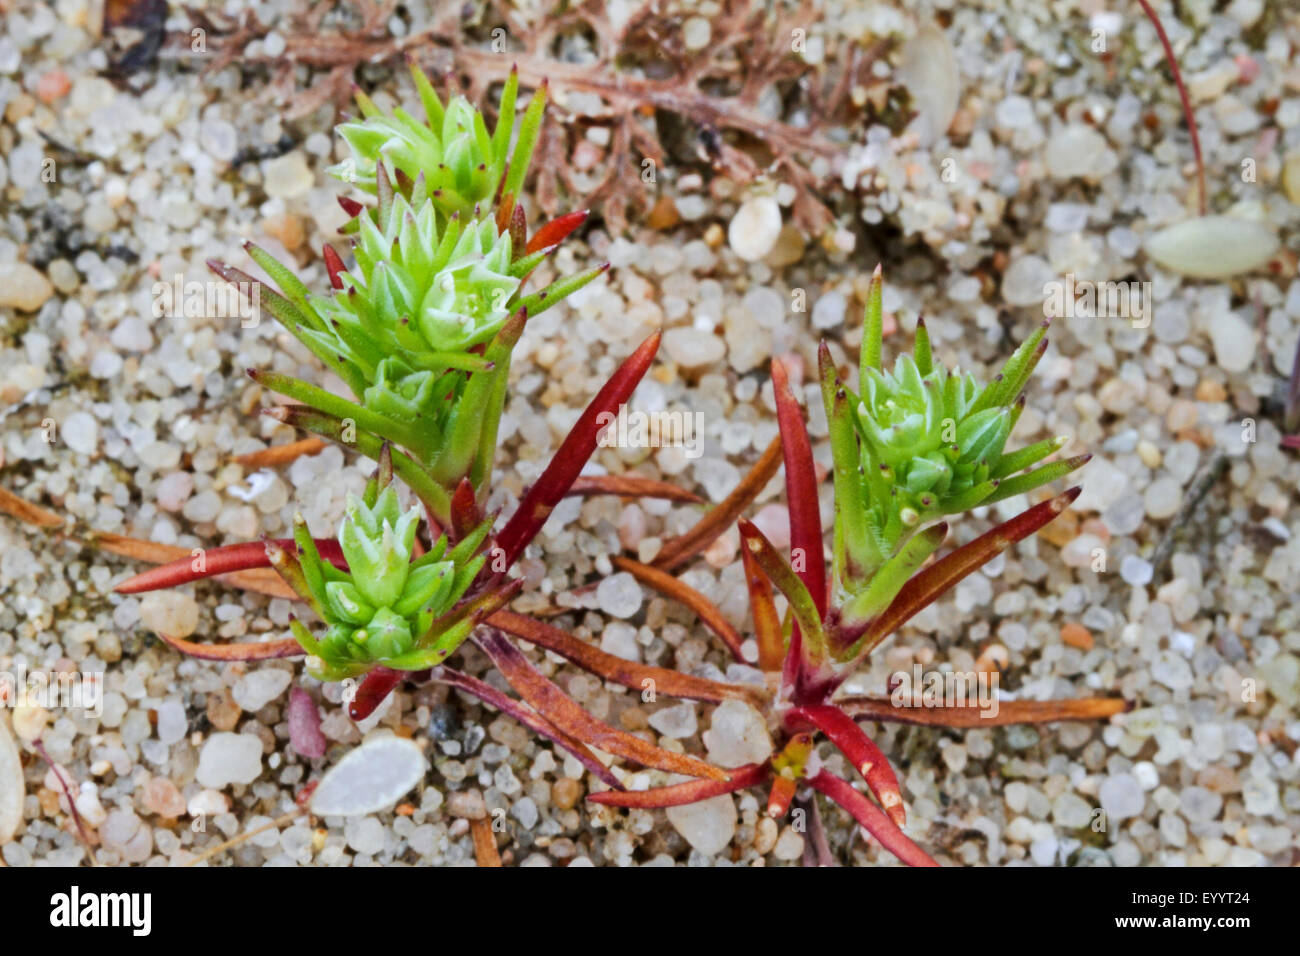 annual knawel (Scleranthus annuus), blooming, Germany Stock Photo